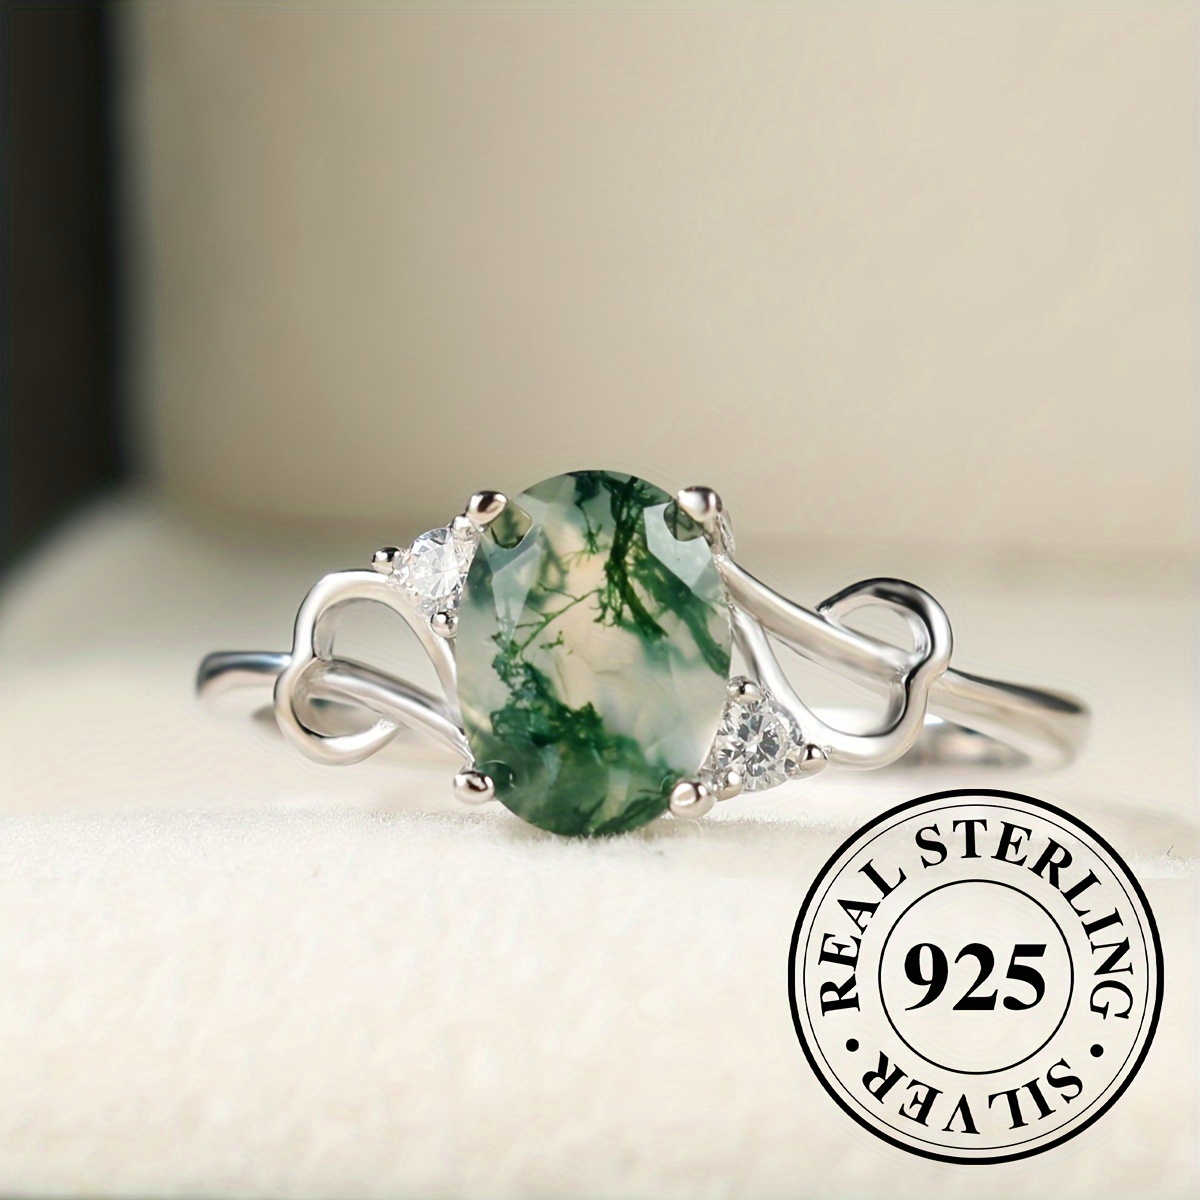 

925 Sterling Silver Ring Inlaid Moss Agate In Egg Shape High Quality Jewelry Match Daily Outfits Party Accessory ( Grain Of Stone May Differ From 1 Another )